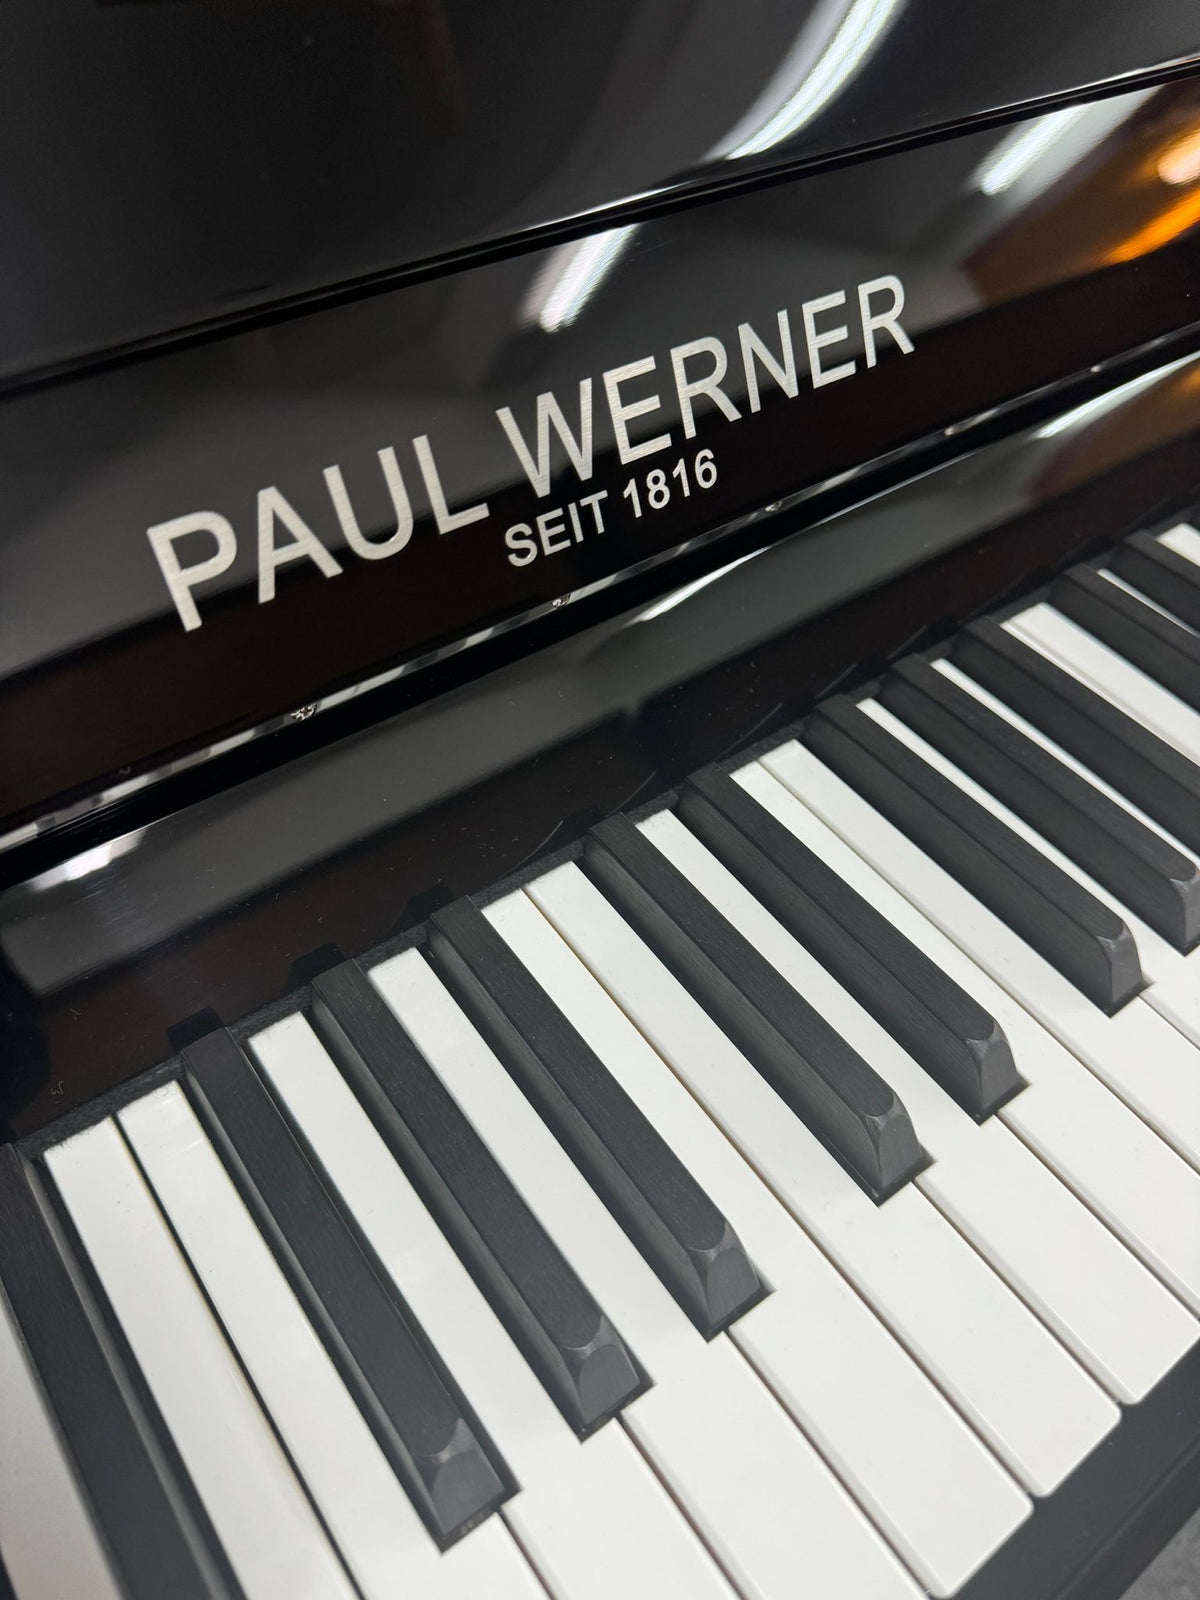 Paul Werner Upright Piano - P2